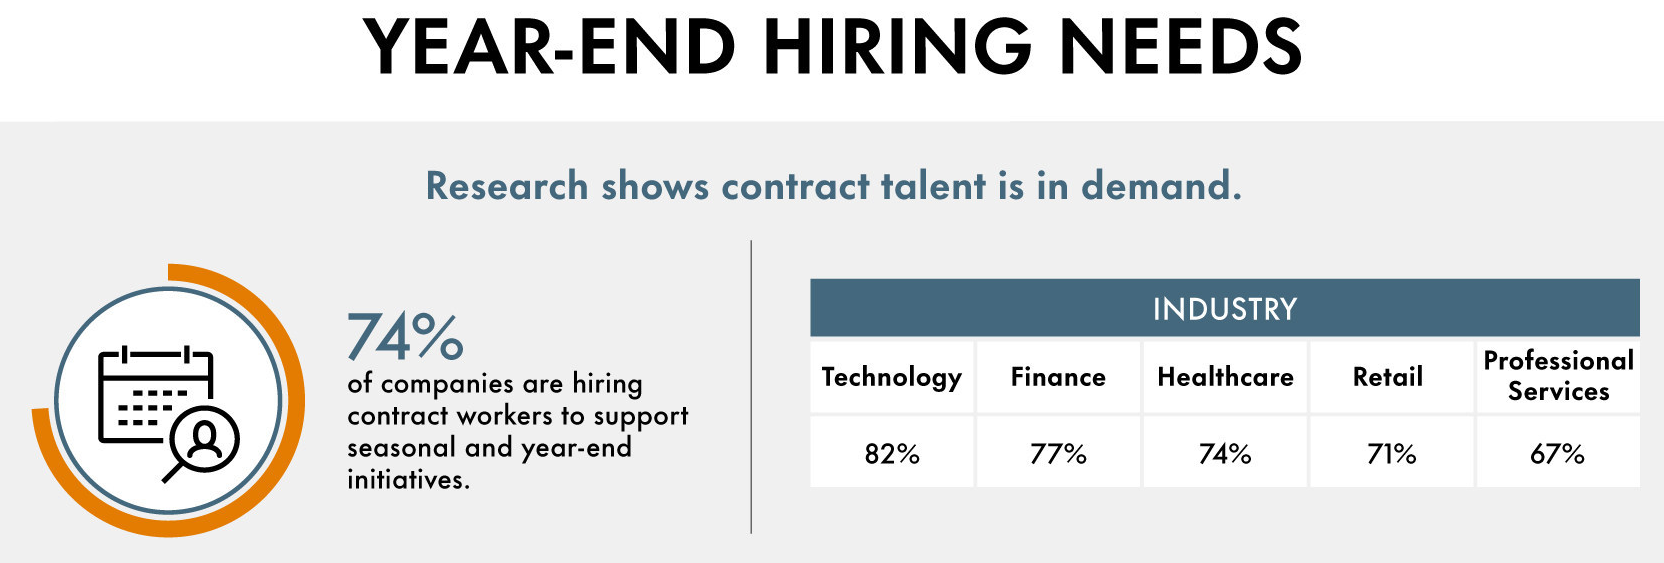 hire-contract-workers-graphic